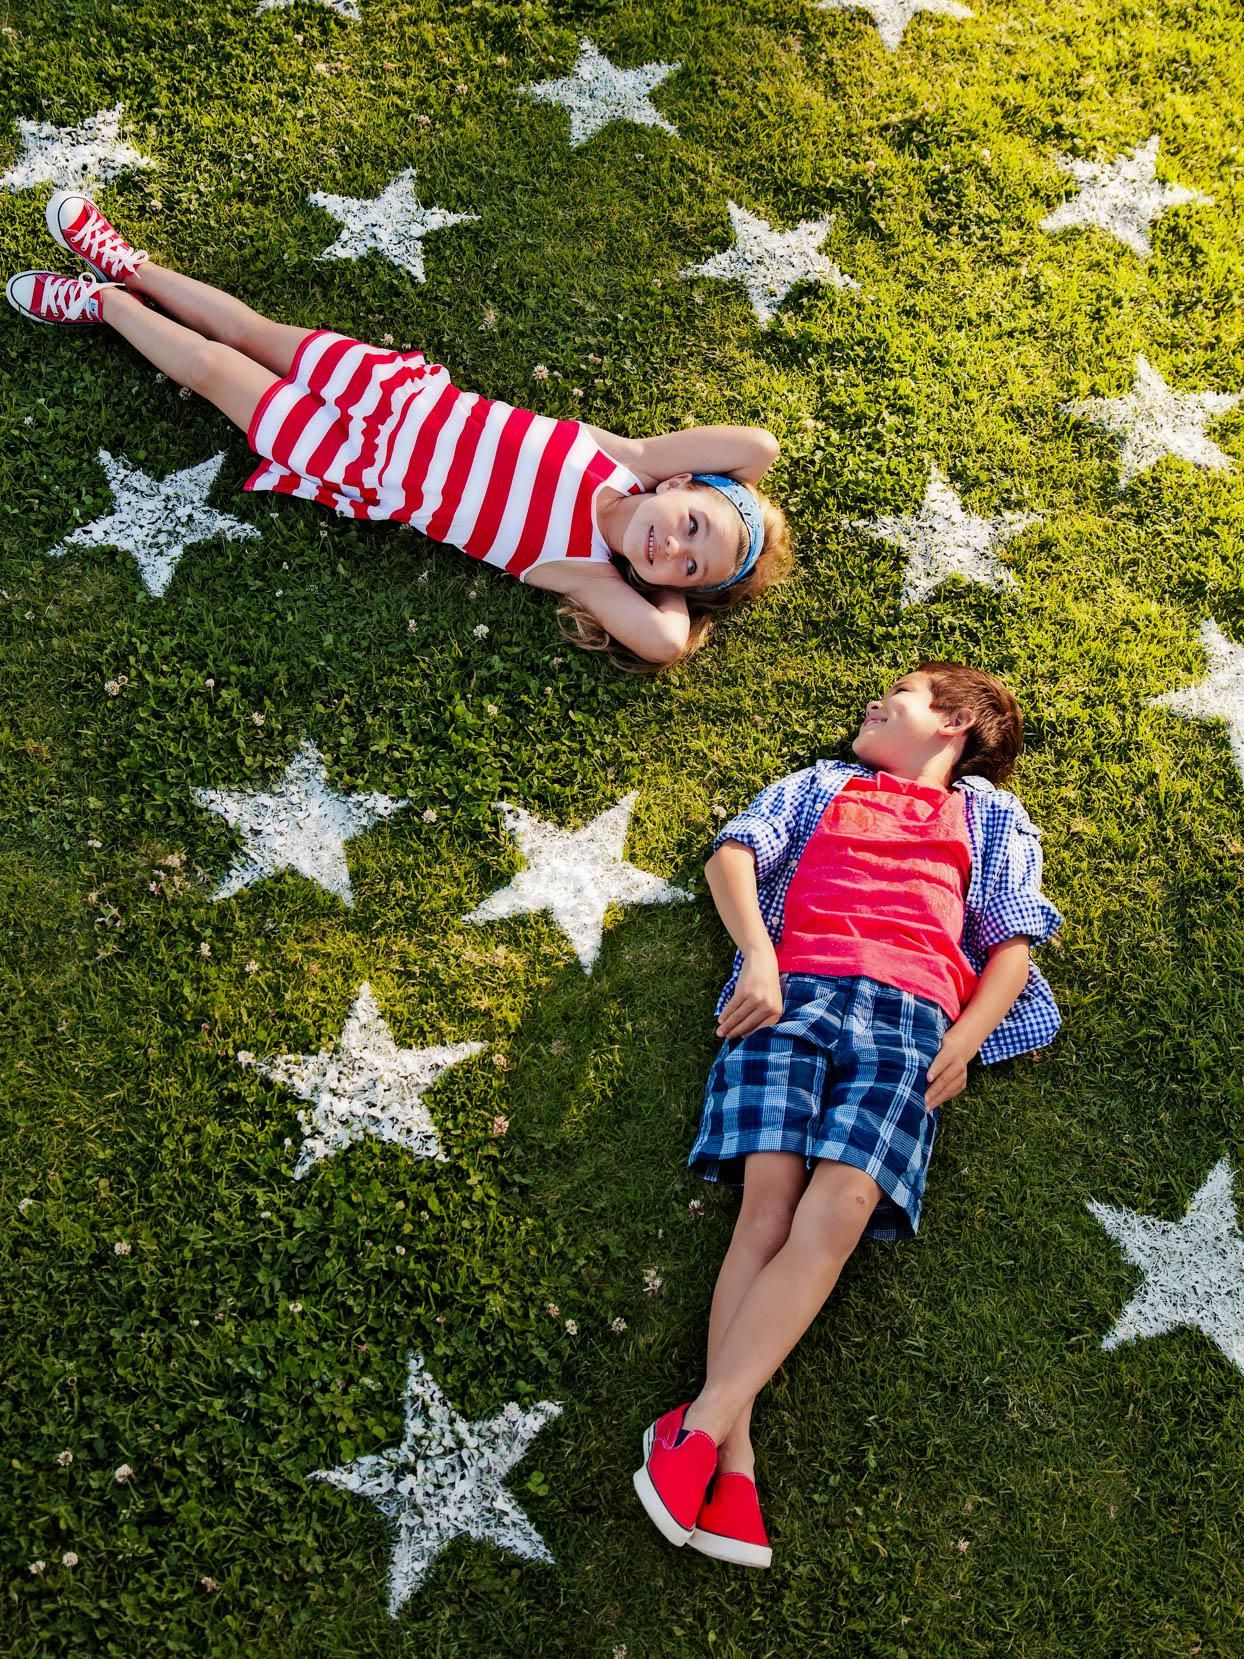 15 Easy Lawn Games To Make For 4th of July Weekend